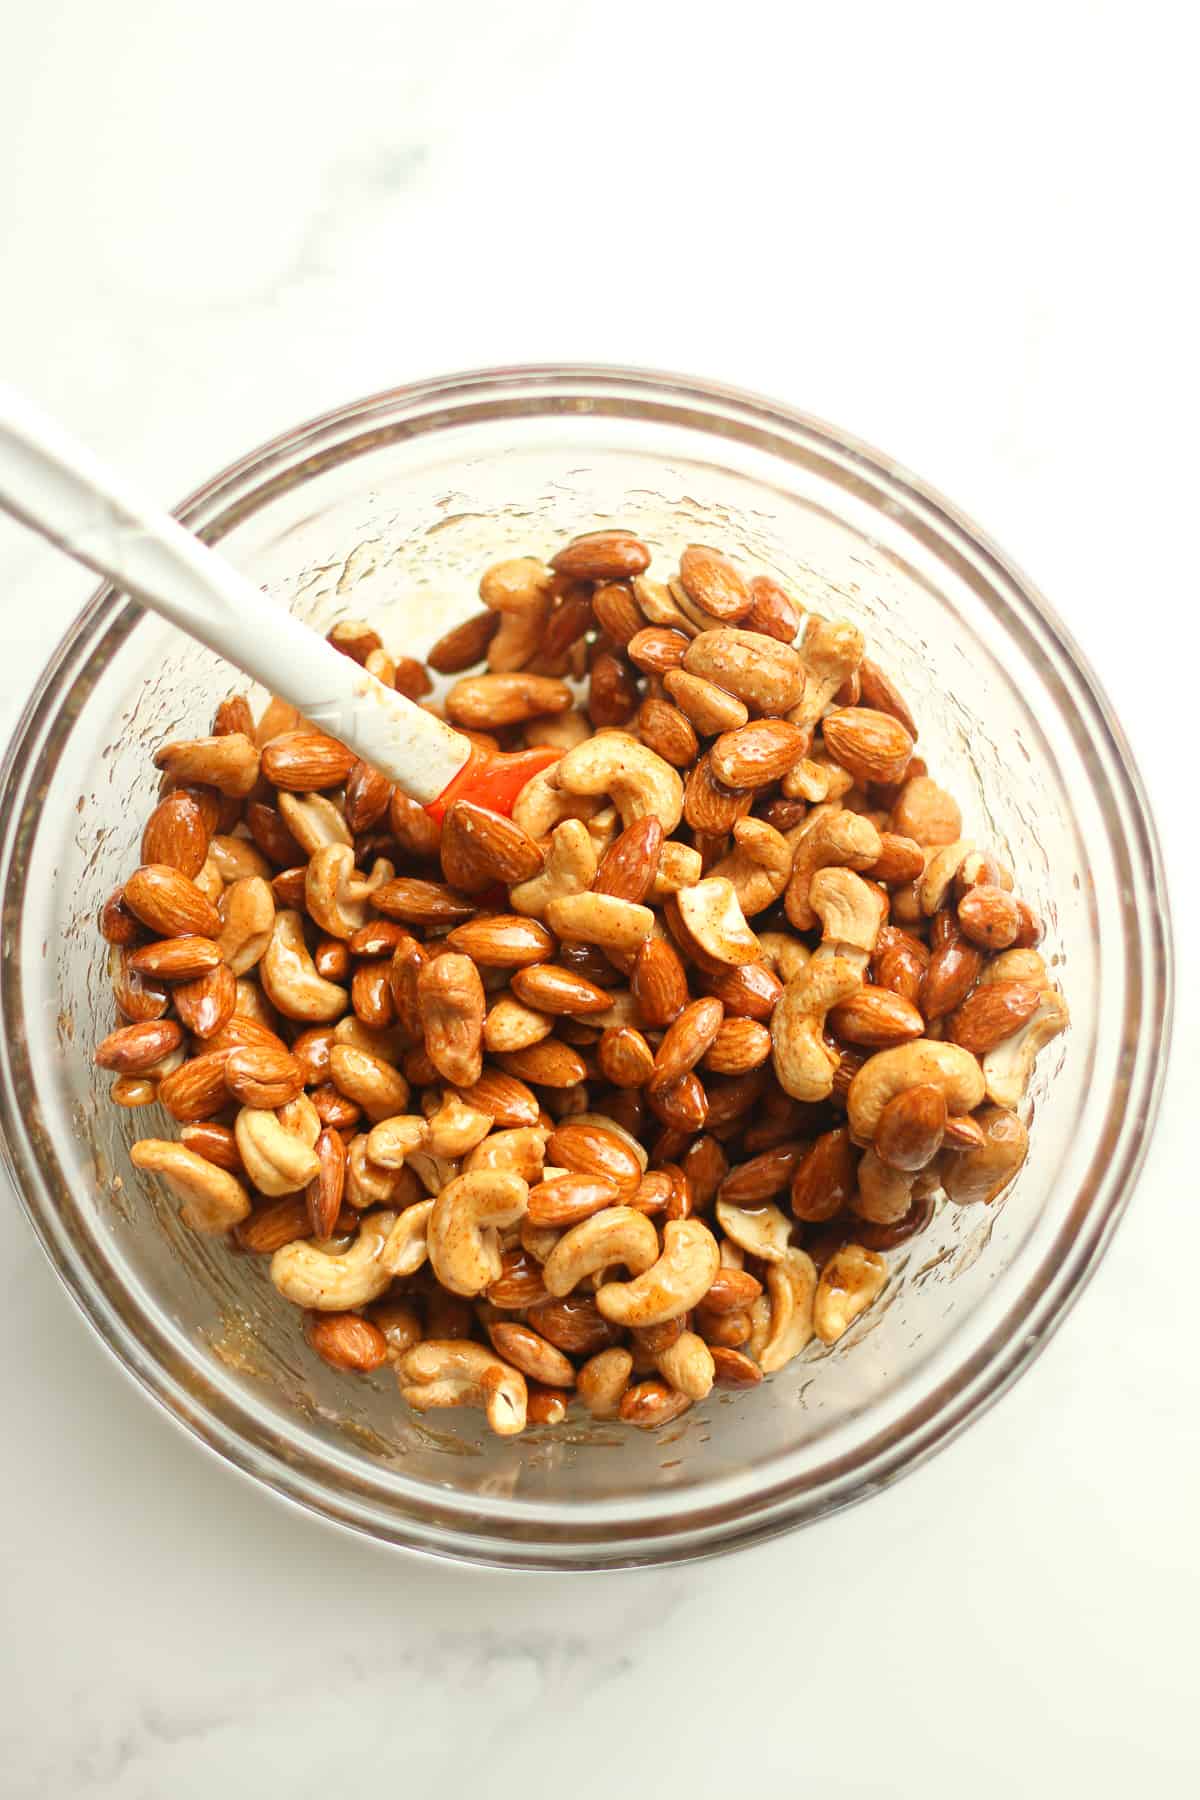 A bowl of the nuts with the ingredients added.